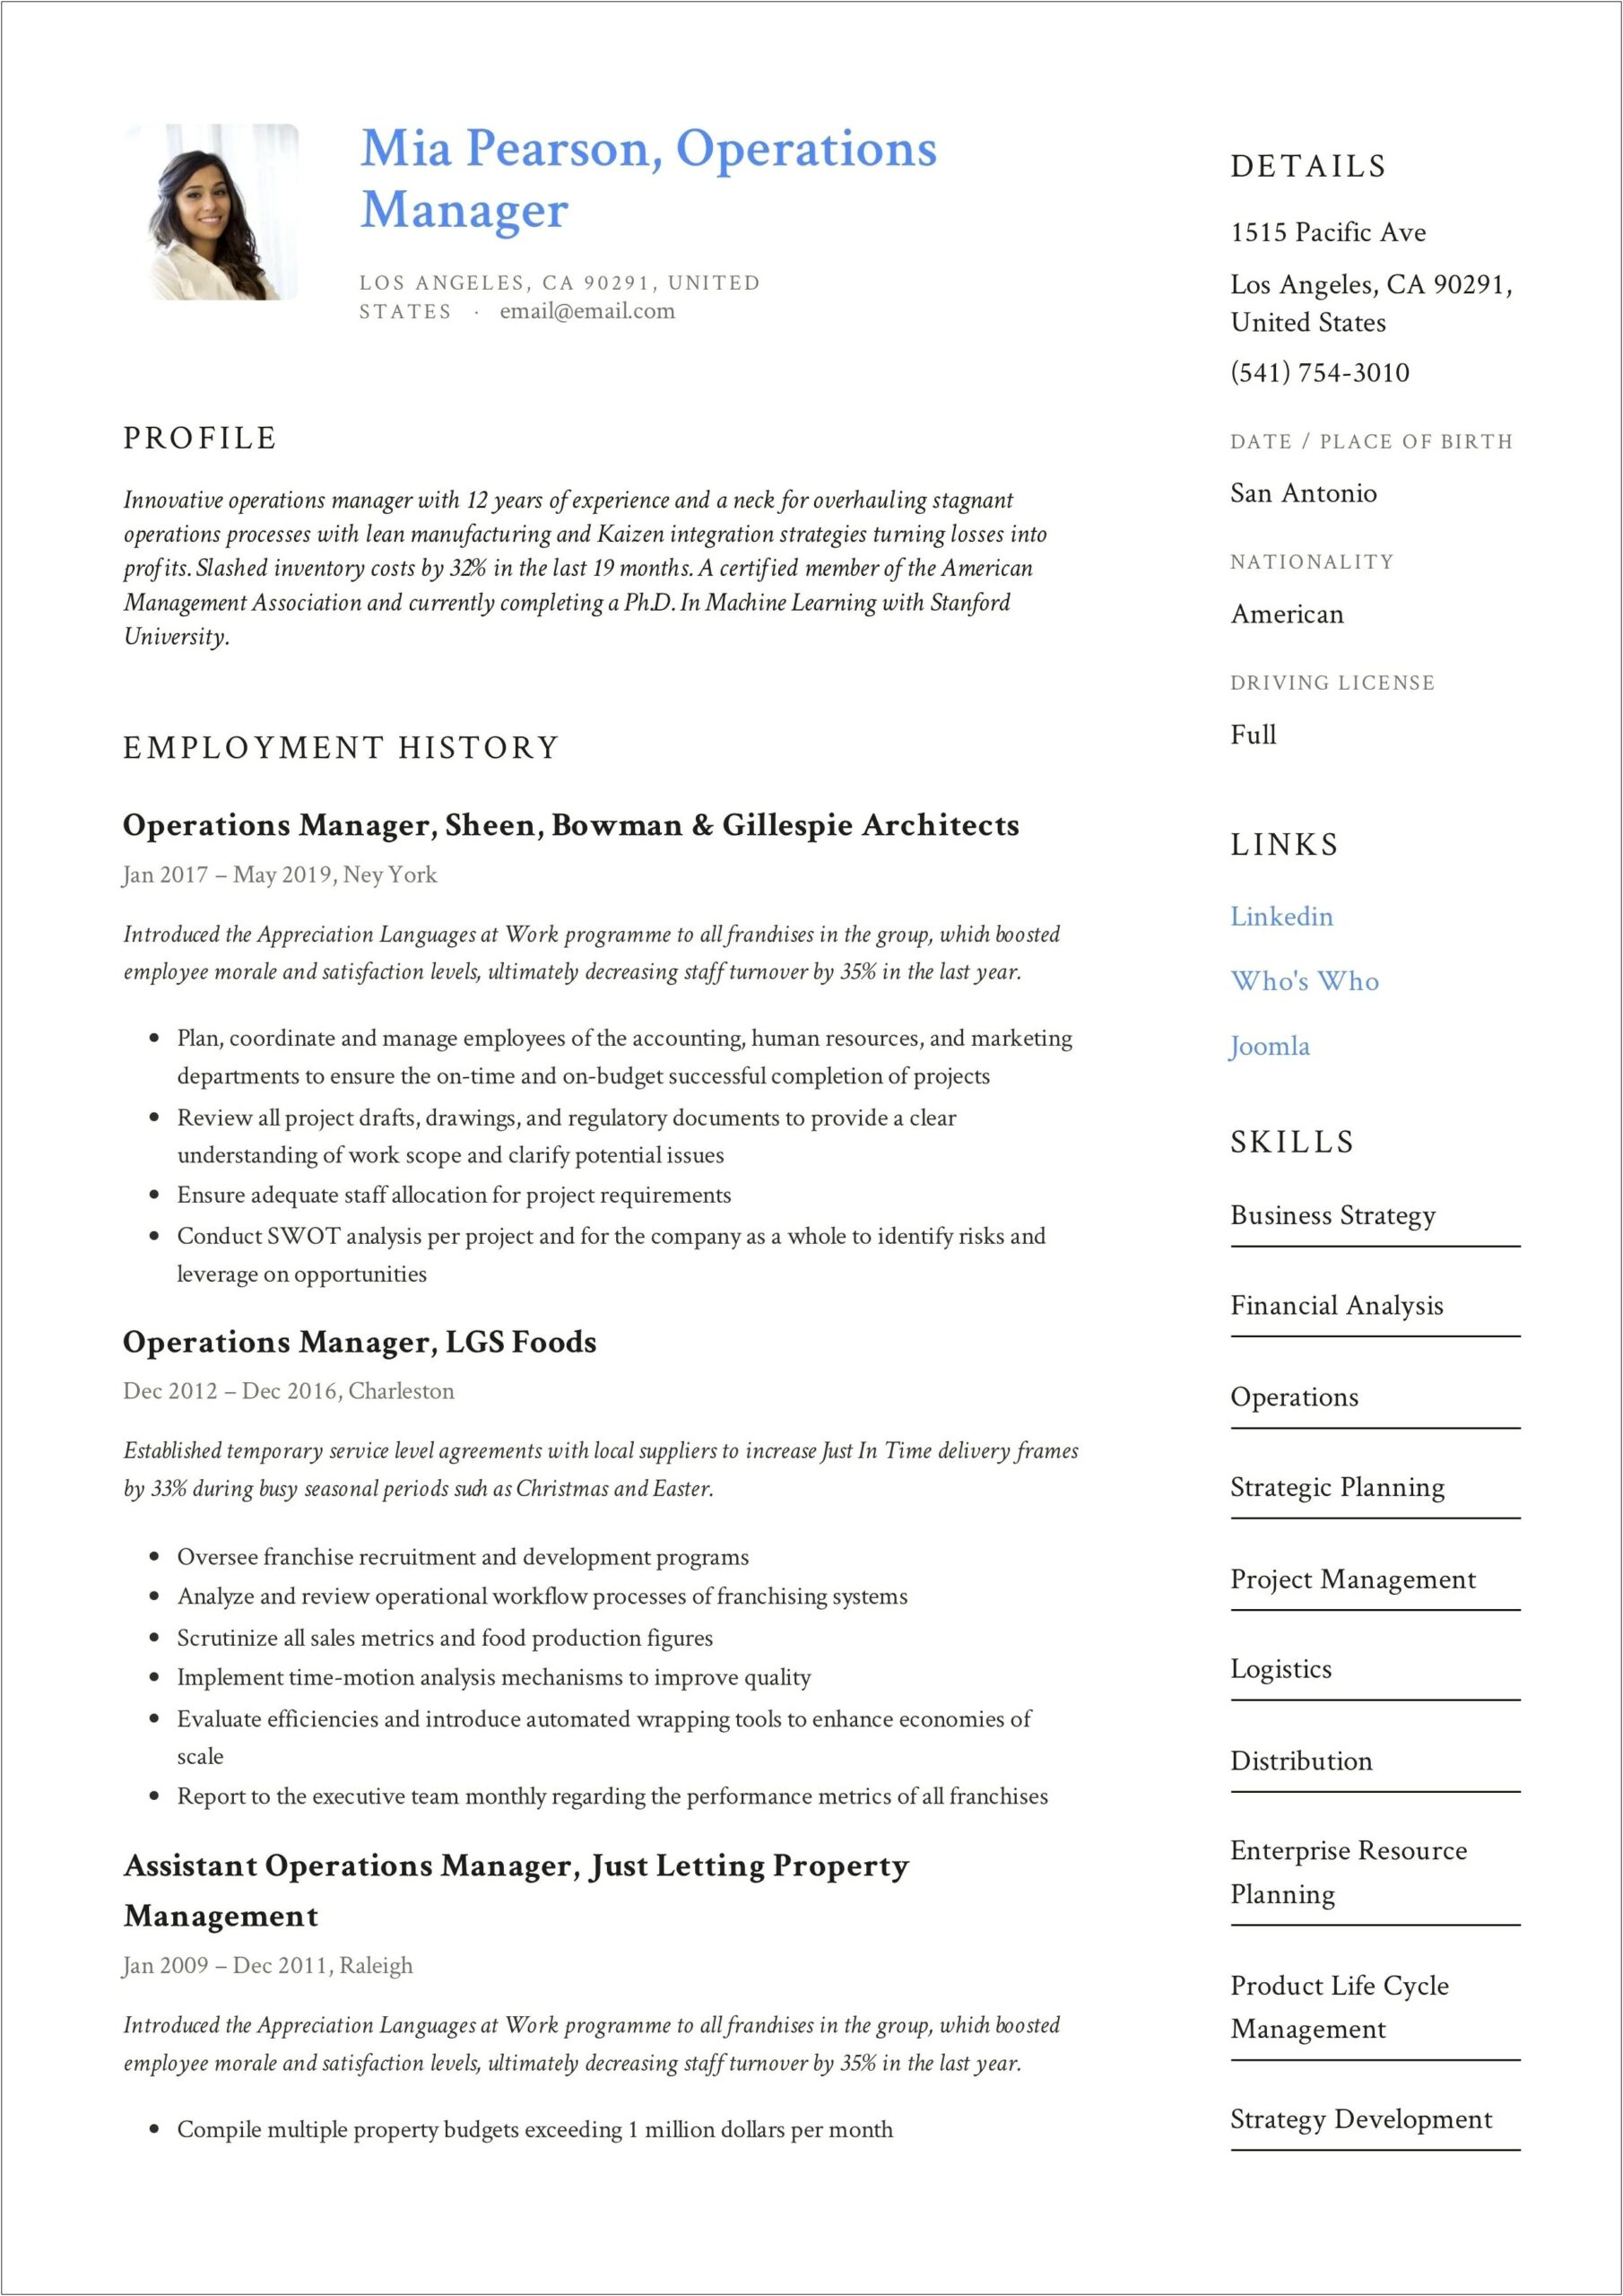 Resume For Property Manager Pdf